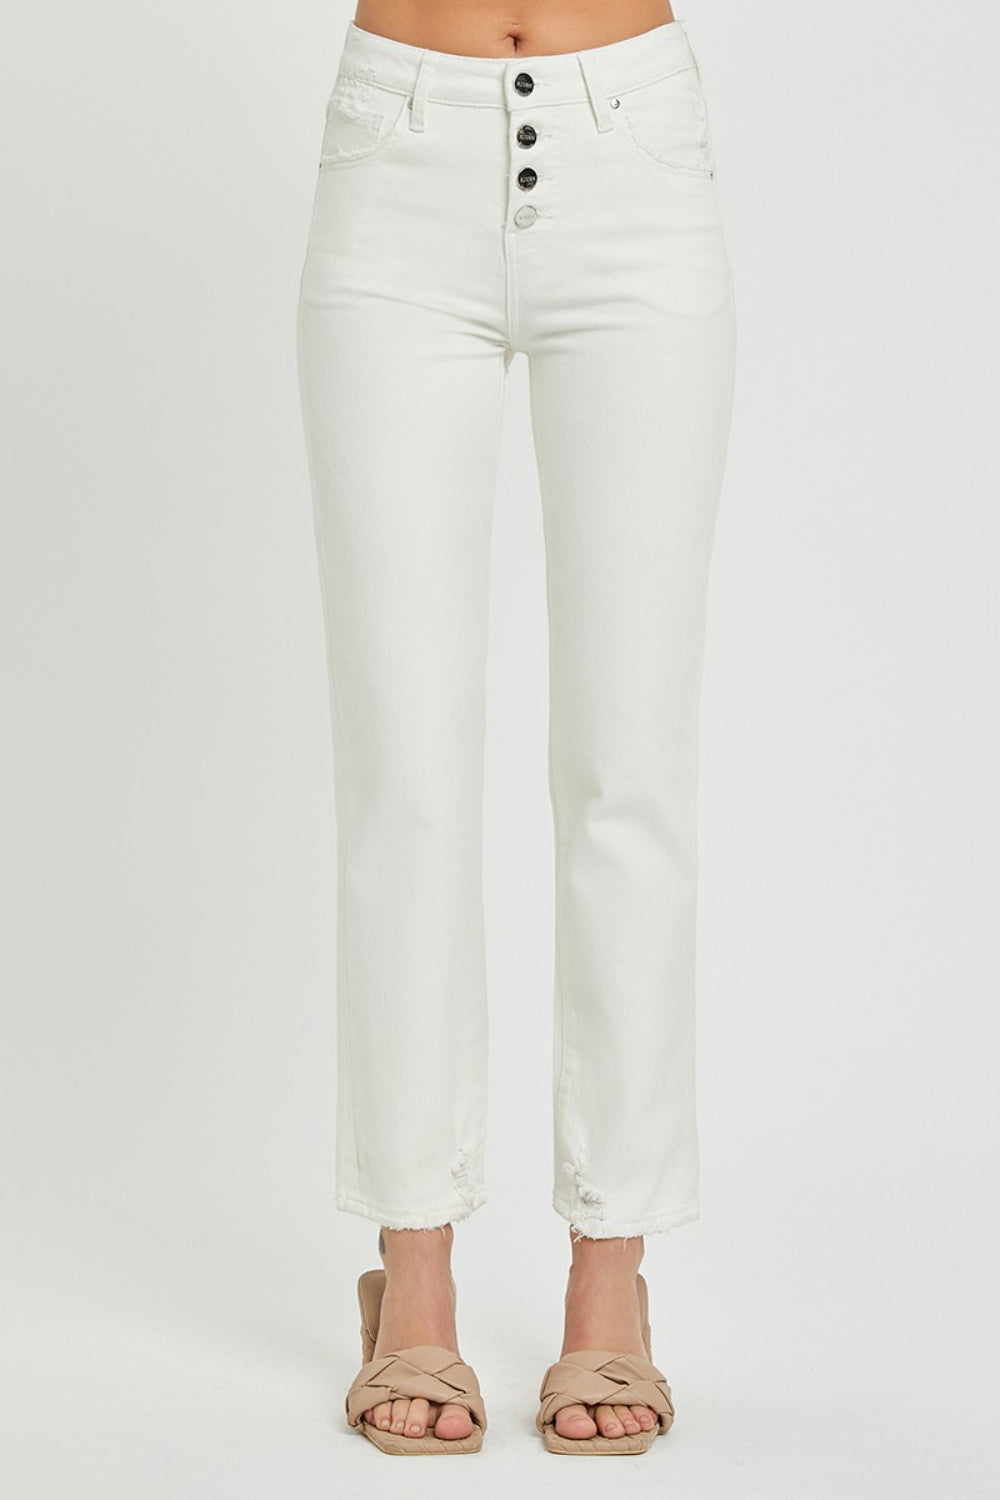 Mid-rise white jeans with a stylish button-fly front by RISEN.